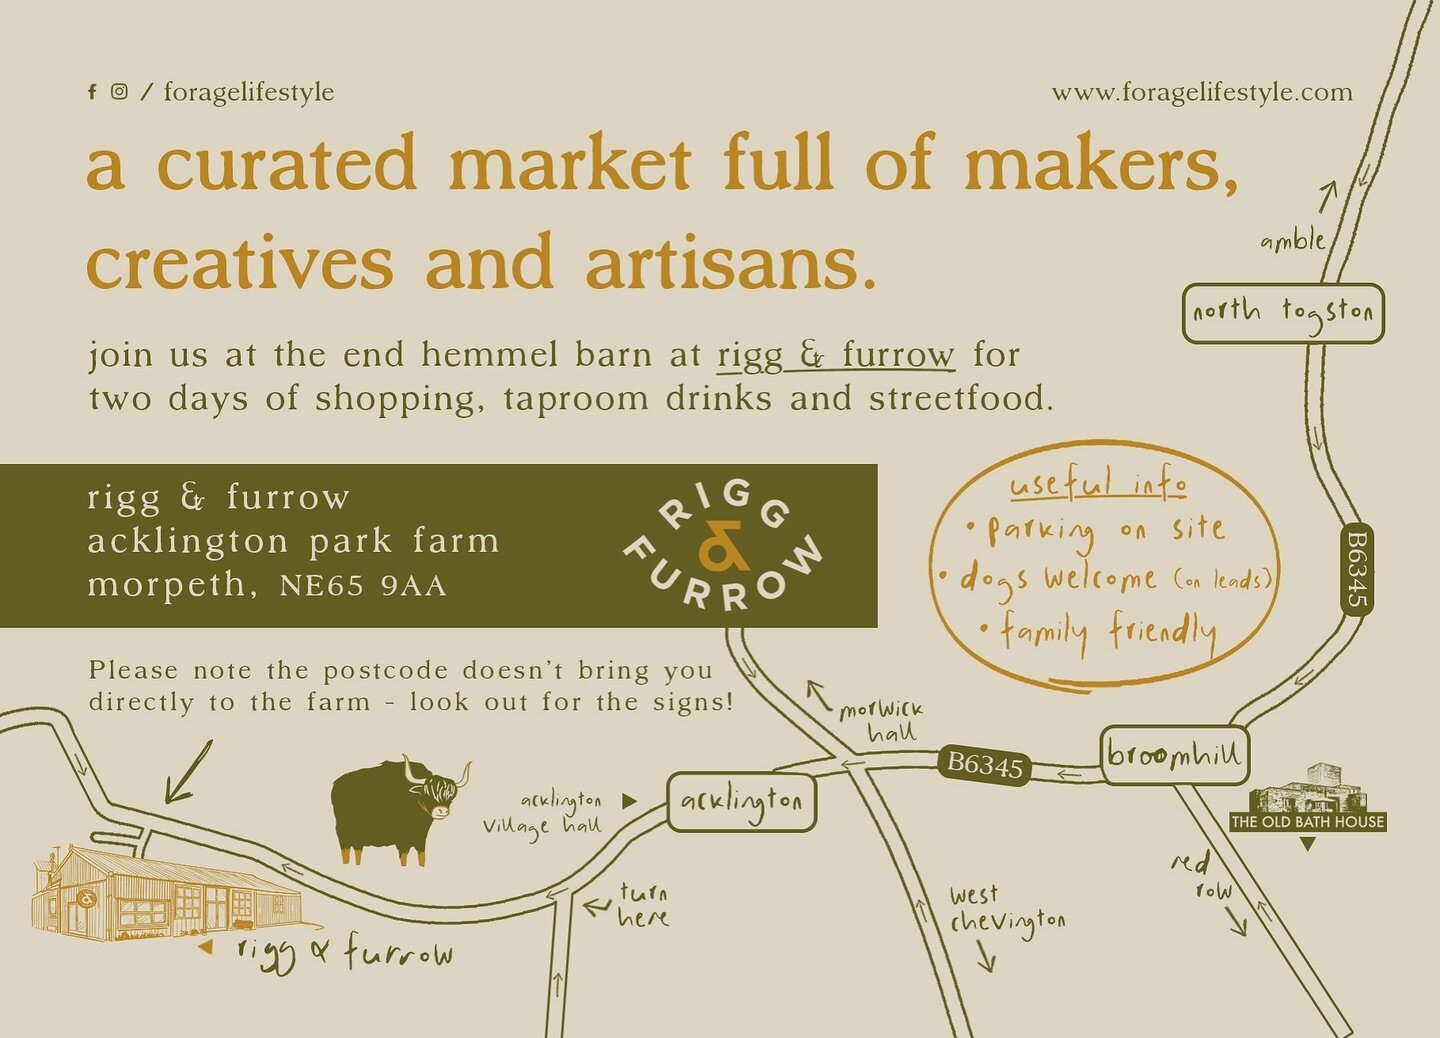 Where to find us at our Forage Lifestyle Easter Market NEXT FRIDAY &amp; SATURDAY - a curated market full of makers, creatives and artisans! 🐣

Join us at the End Hemmel barn @riggandfurrow for two days of thoughtful shopping from around 25 artisan 